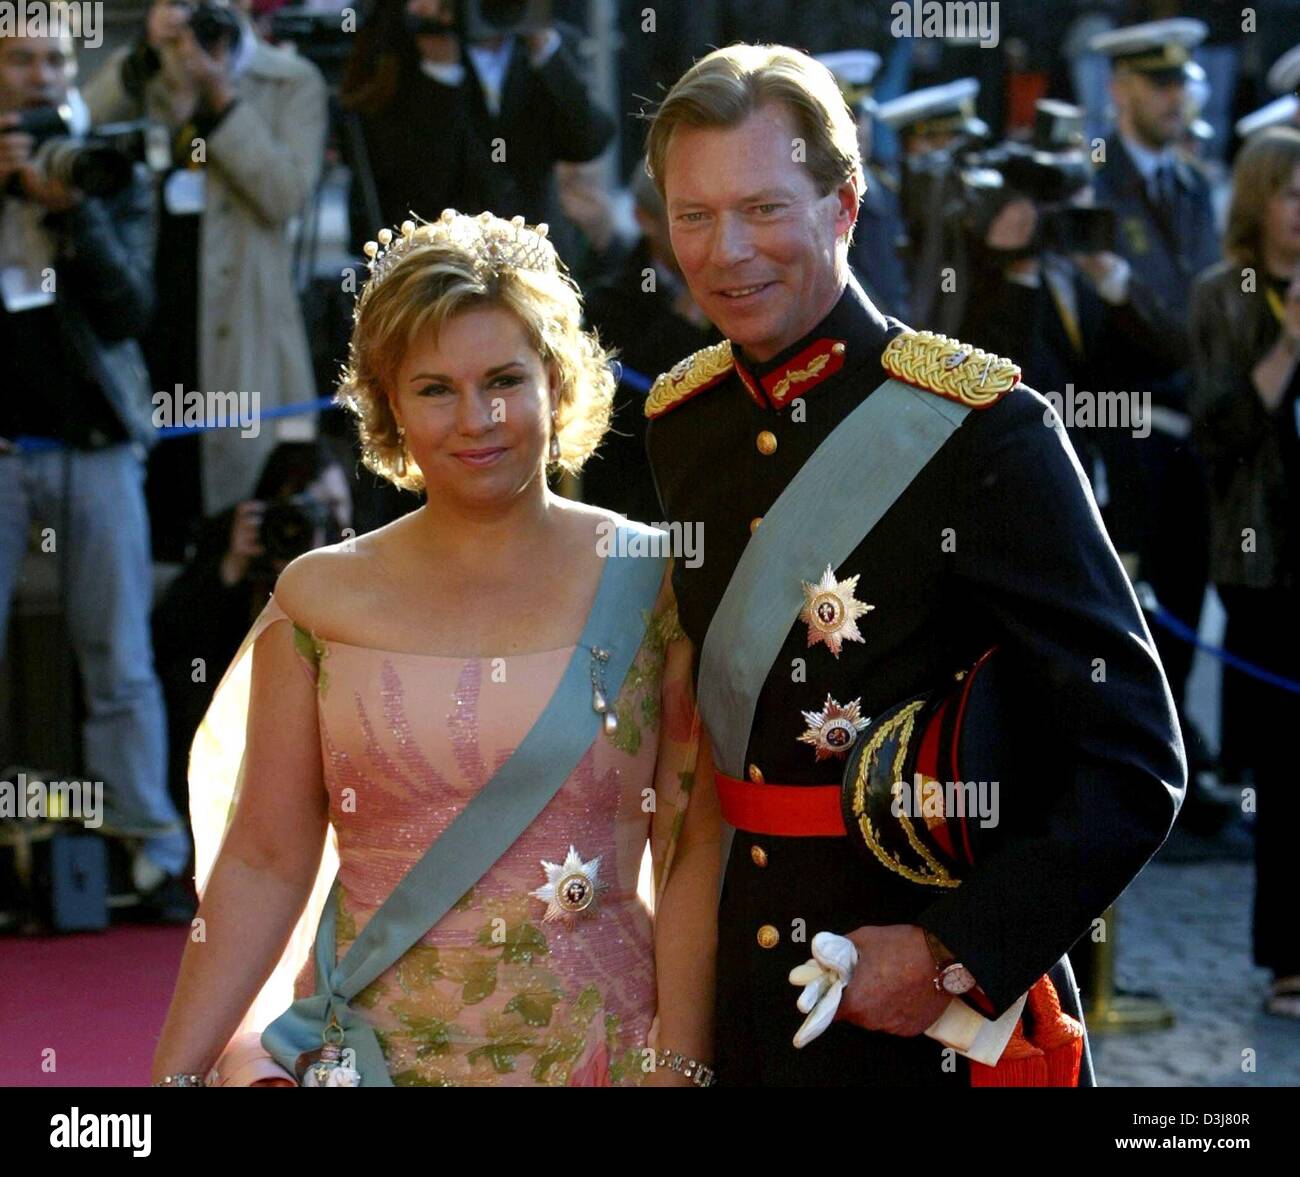 (dpa) - On the eve of the wedding of Crown Prince Frederik of Denmark and Mary Donaldson, Grand Duchess Maria Teresa and Grand Duke Henri of Luxemburg arrive for a gala at the Royal Theatre in Copenhagen, Denmark, 13 May 2004. Stock Photo